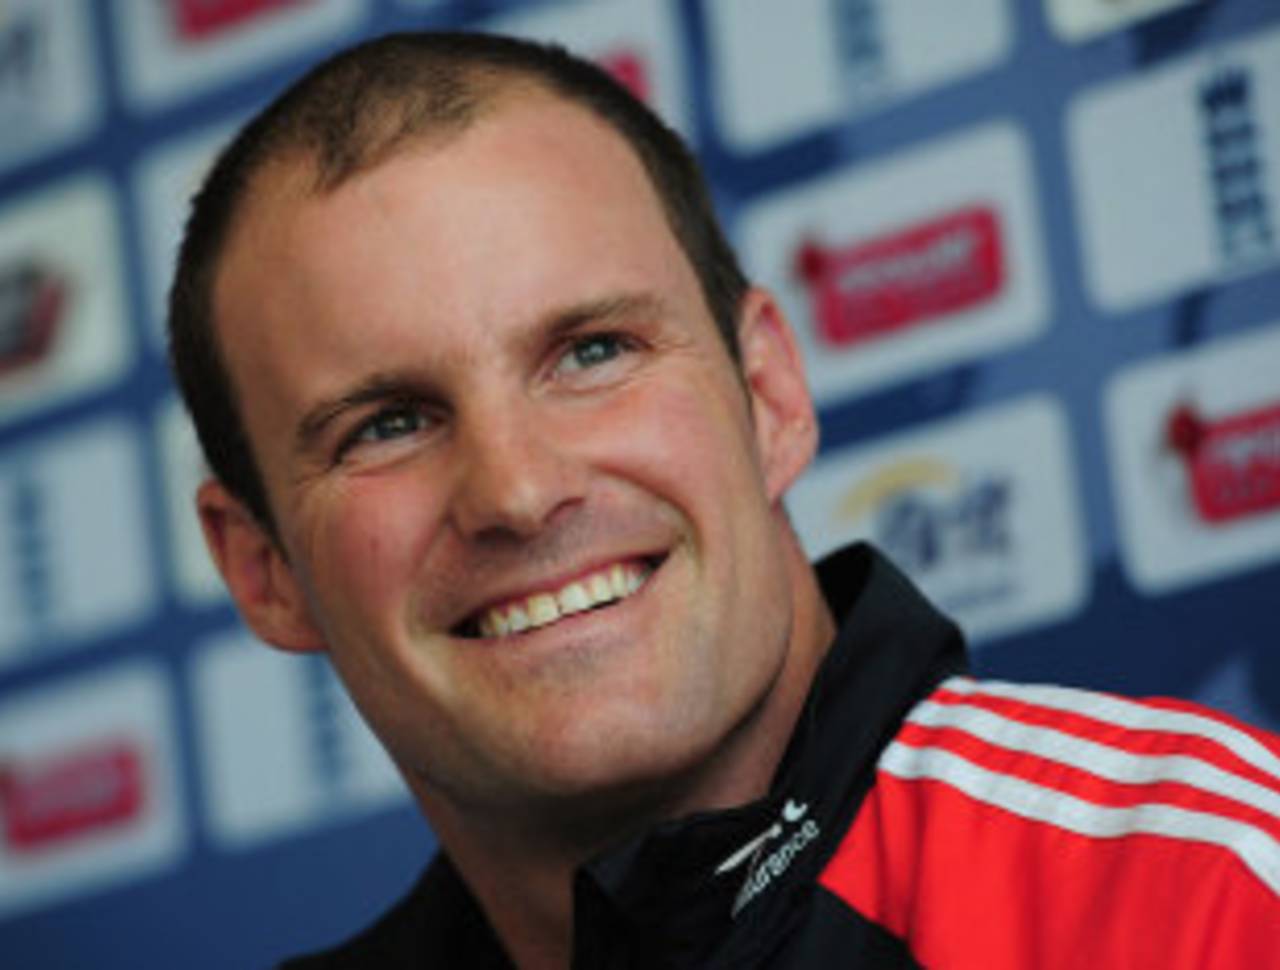 Andrew Strauss smiles during the press conference ahead of the warm-up game between Somerset and India, Taunton, July 14 2011